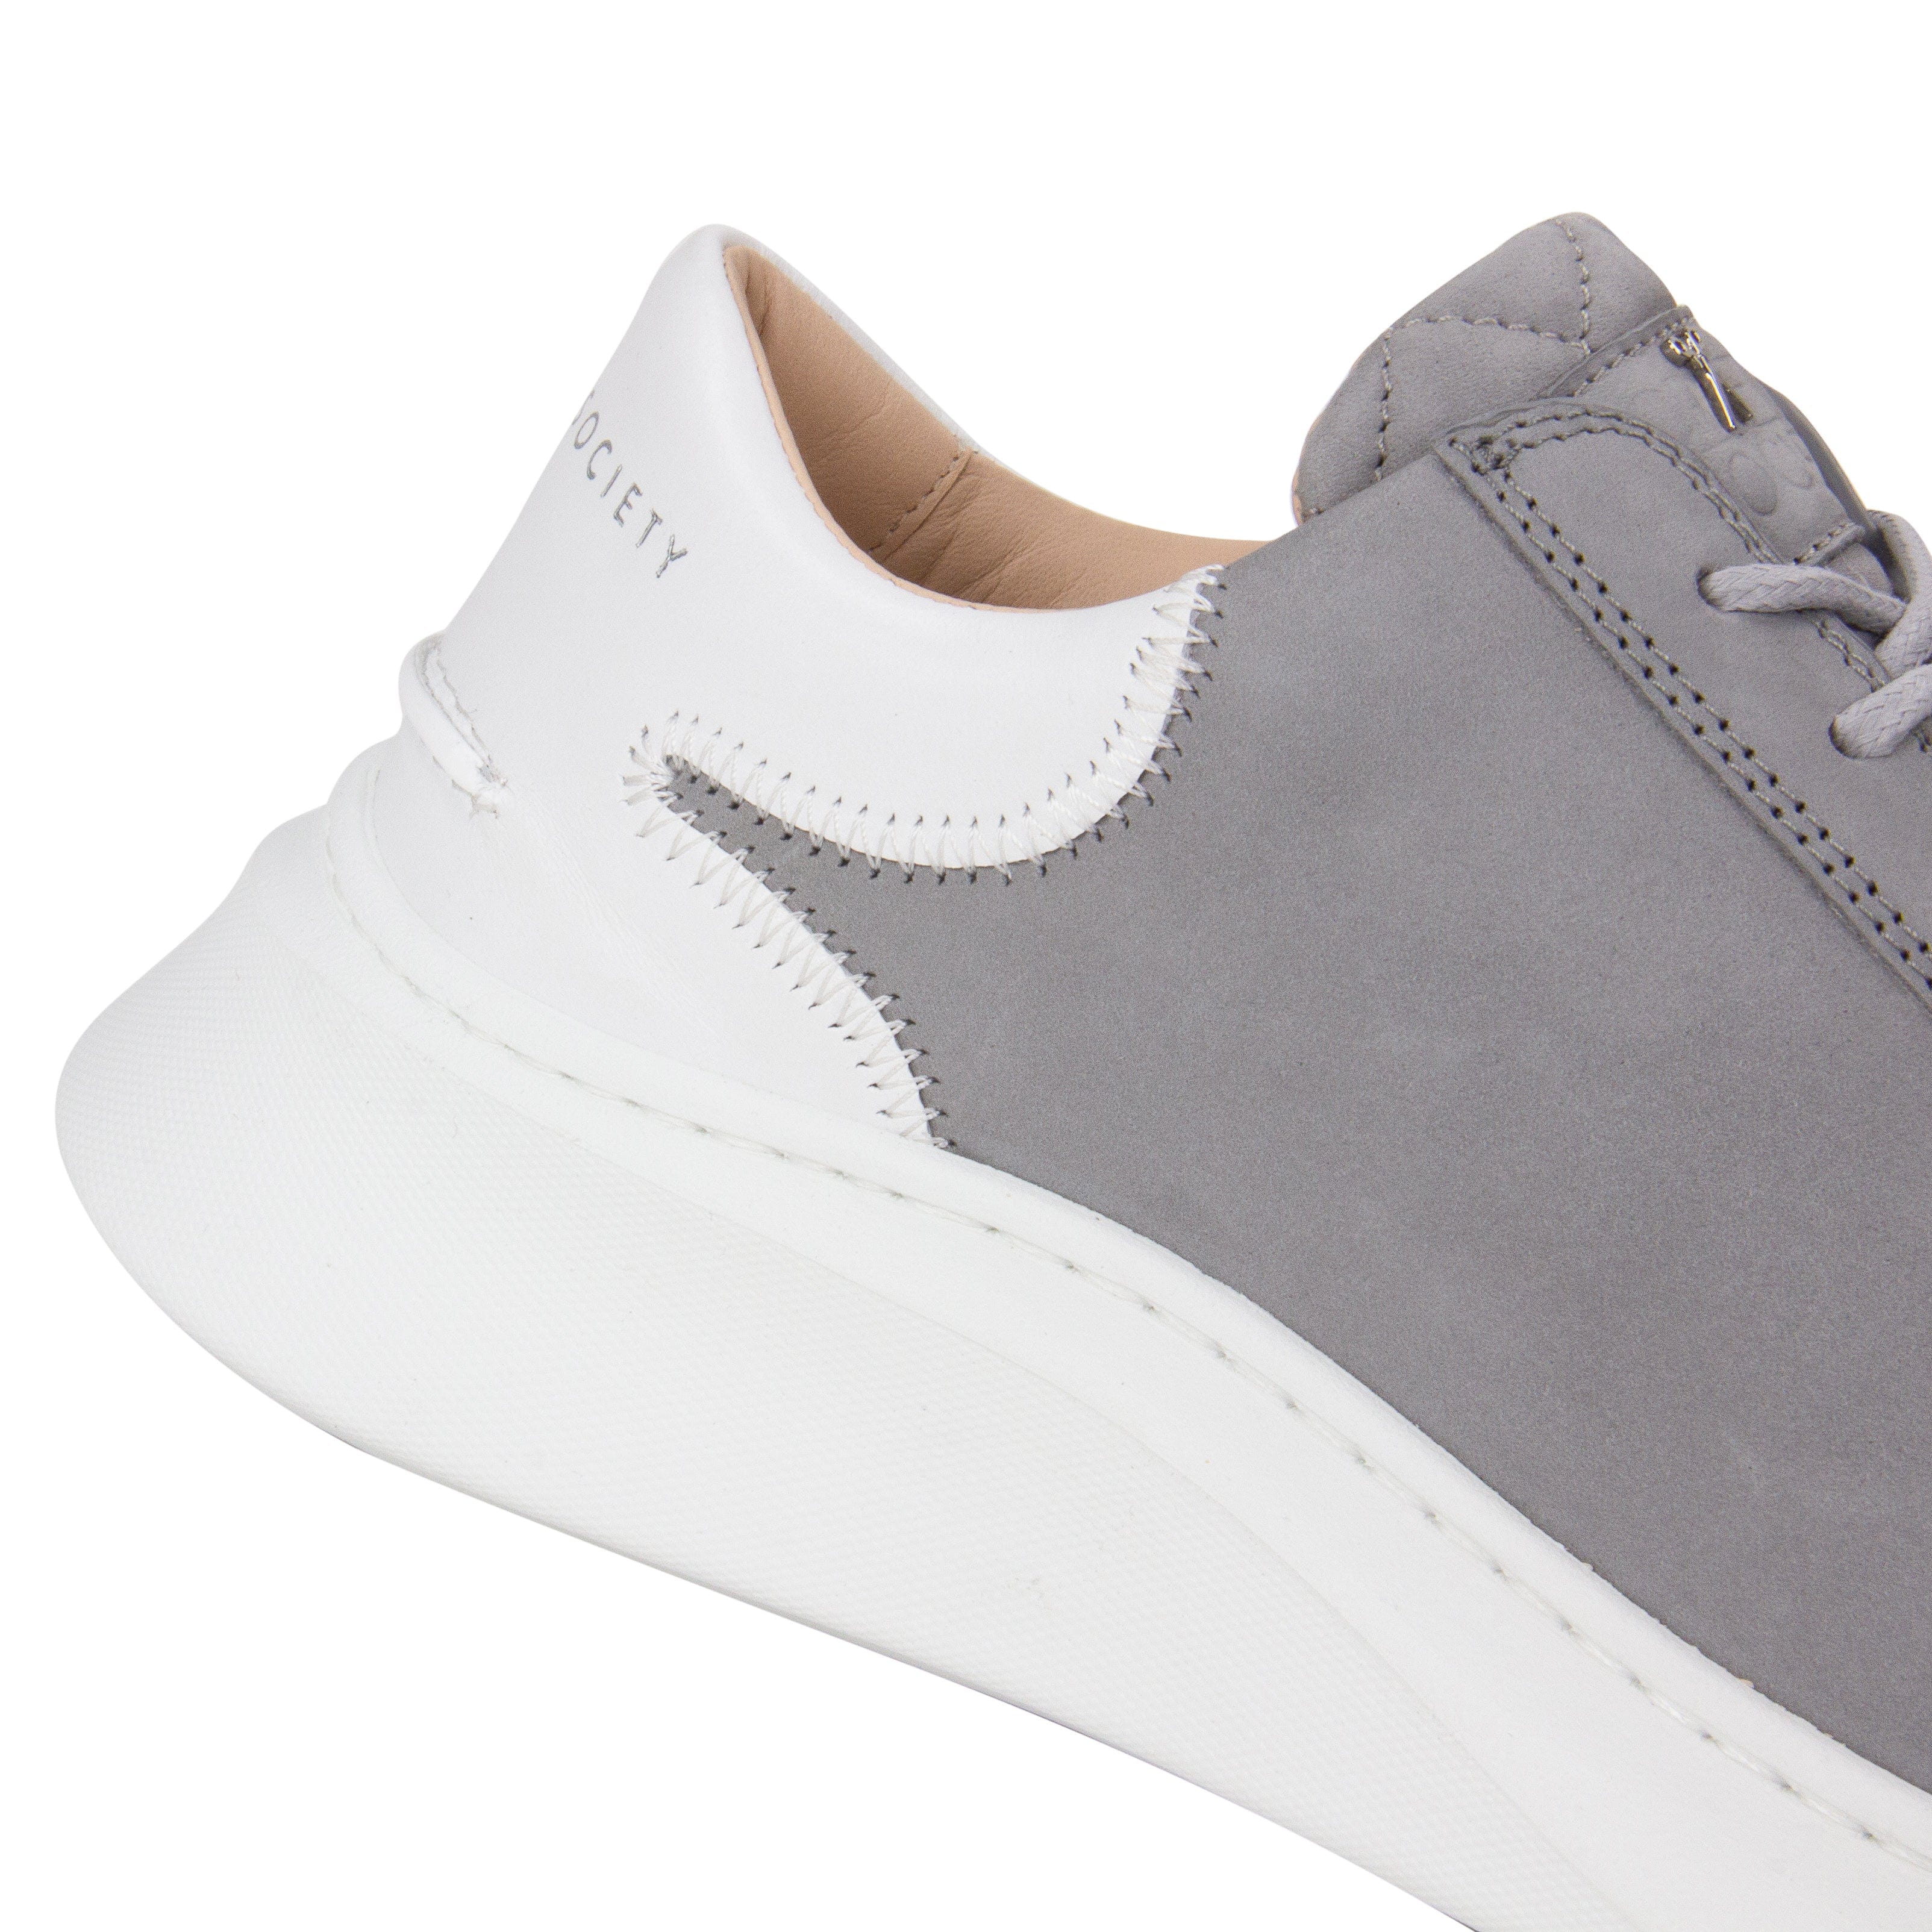 Matteo Low chunky Sneaker | Grey Nubuck & White Full Grain Leather | White Outsole | Made in Italy